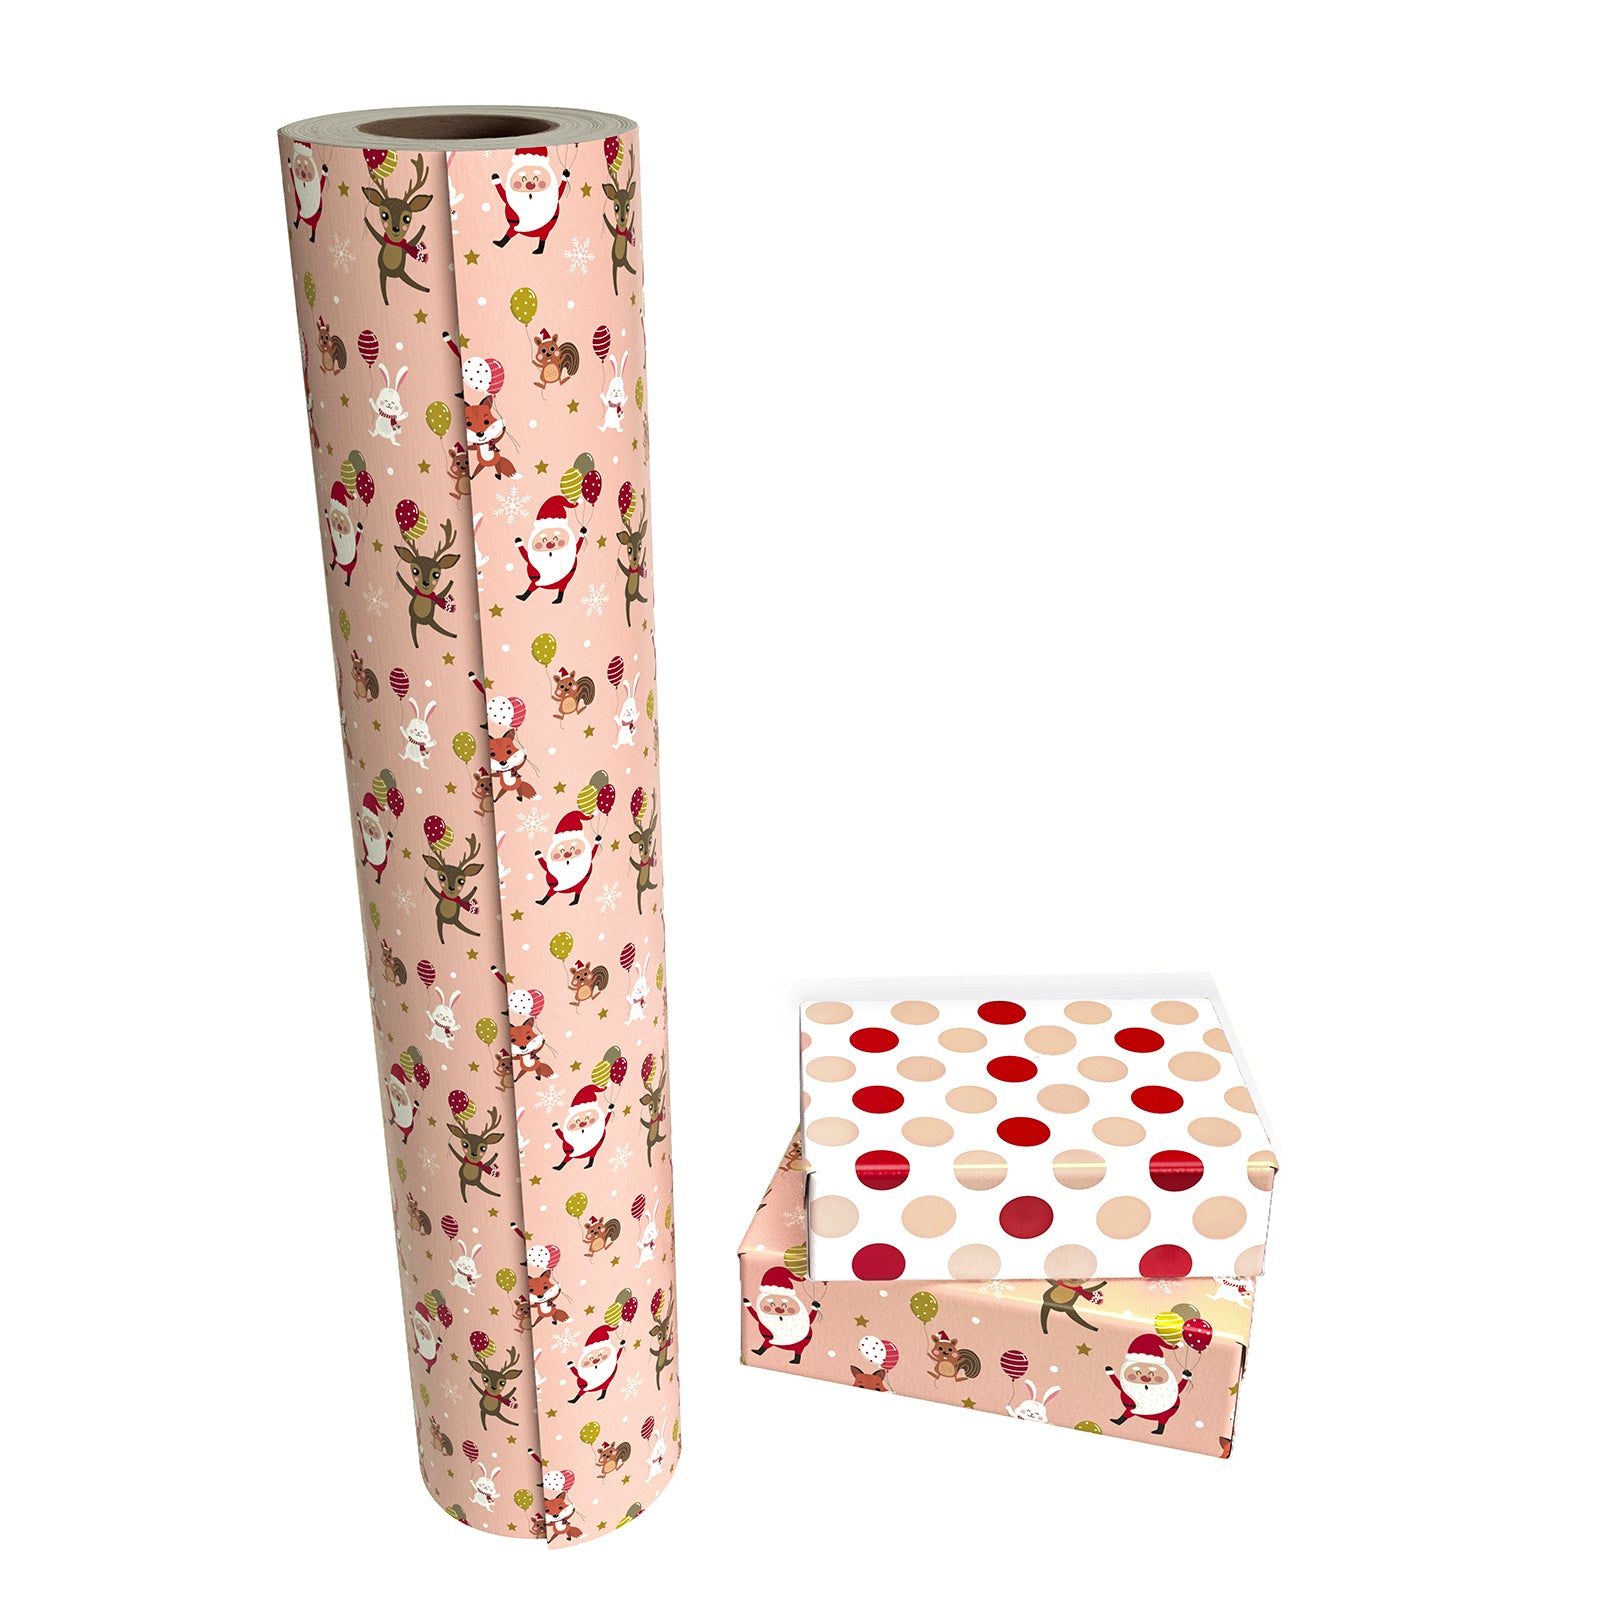 Santa & Animals Wrapping Paper Roll with Champagne Pink & Red Polka Dots on Reverse Wholesale Wrapholic